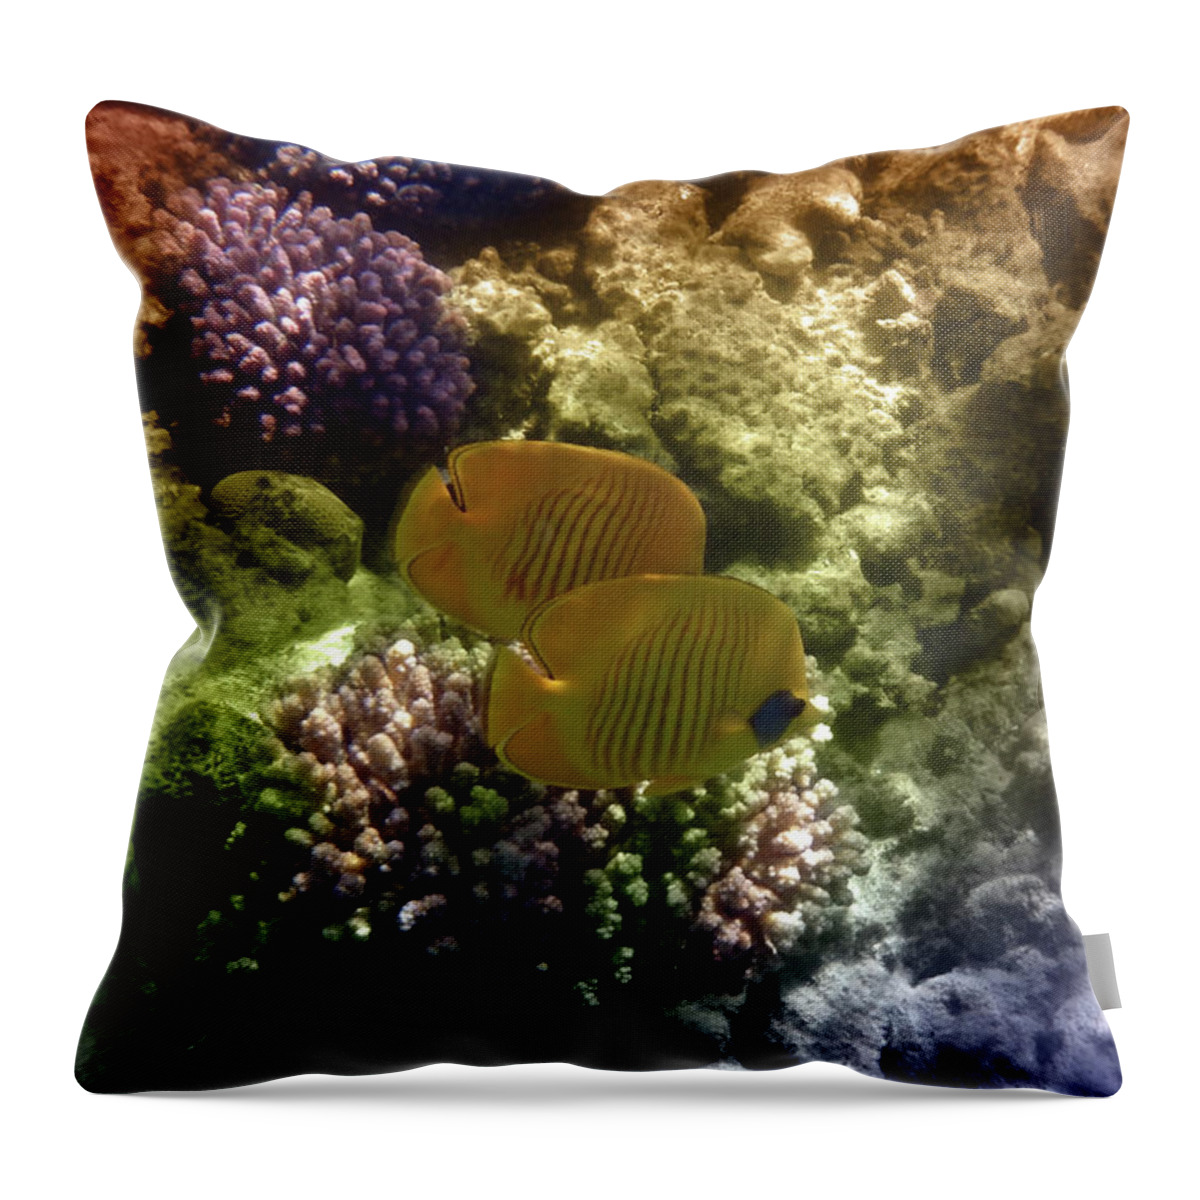 Butterflyfish Throw Pillow featuring the mixed media Two Beautiful Masked Butterflyfish Among the Red Sea Corals by Johanna Hurmerinta